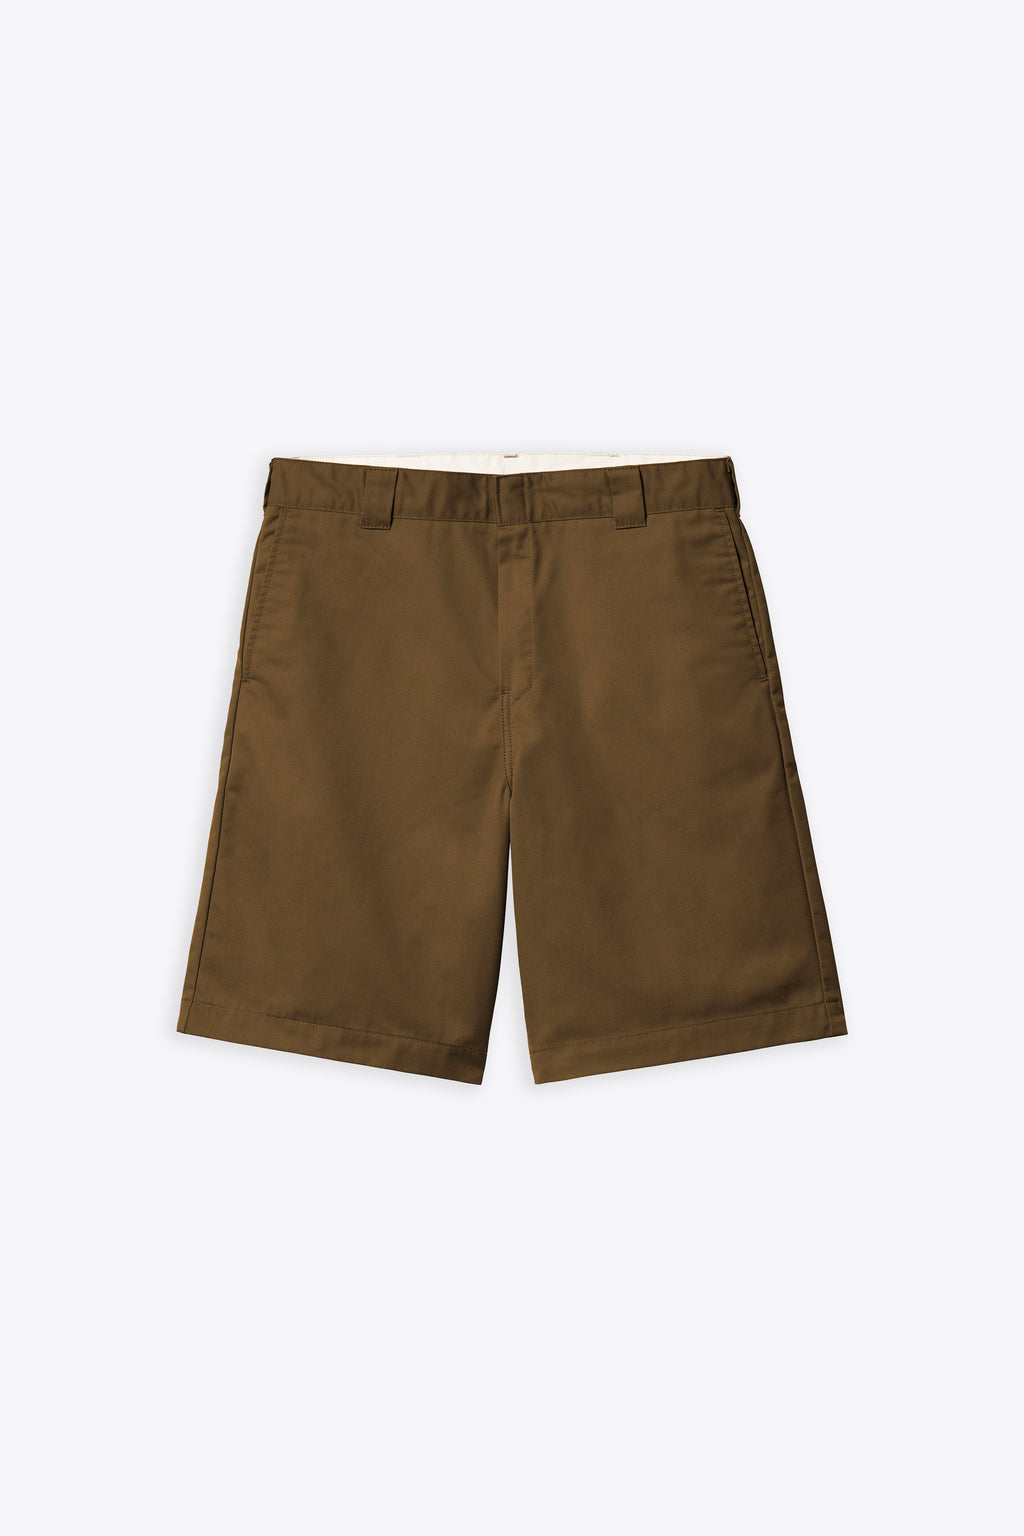 alt-image__Brown-cotton-twill-relaxed-fit-short---Craft-Short